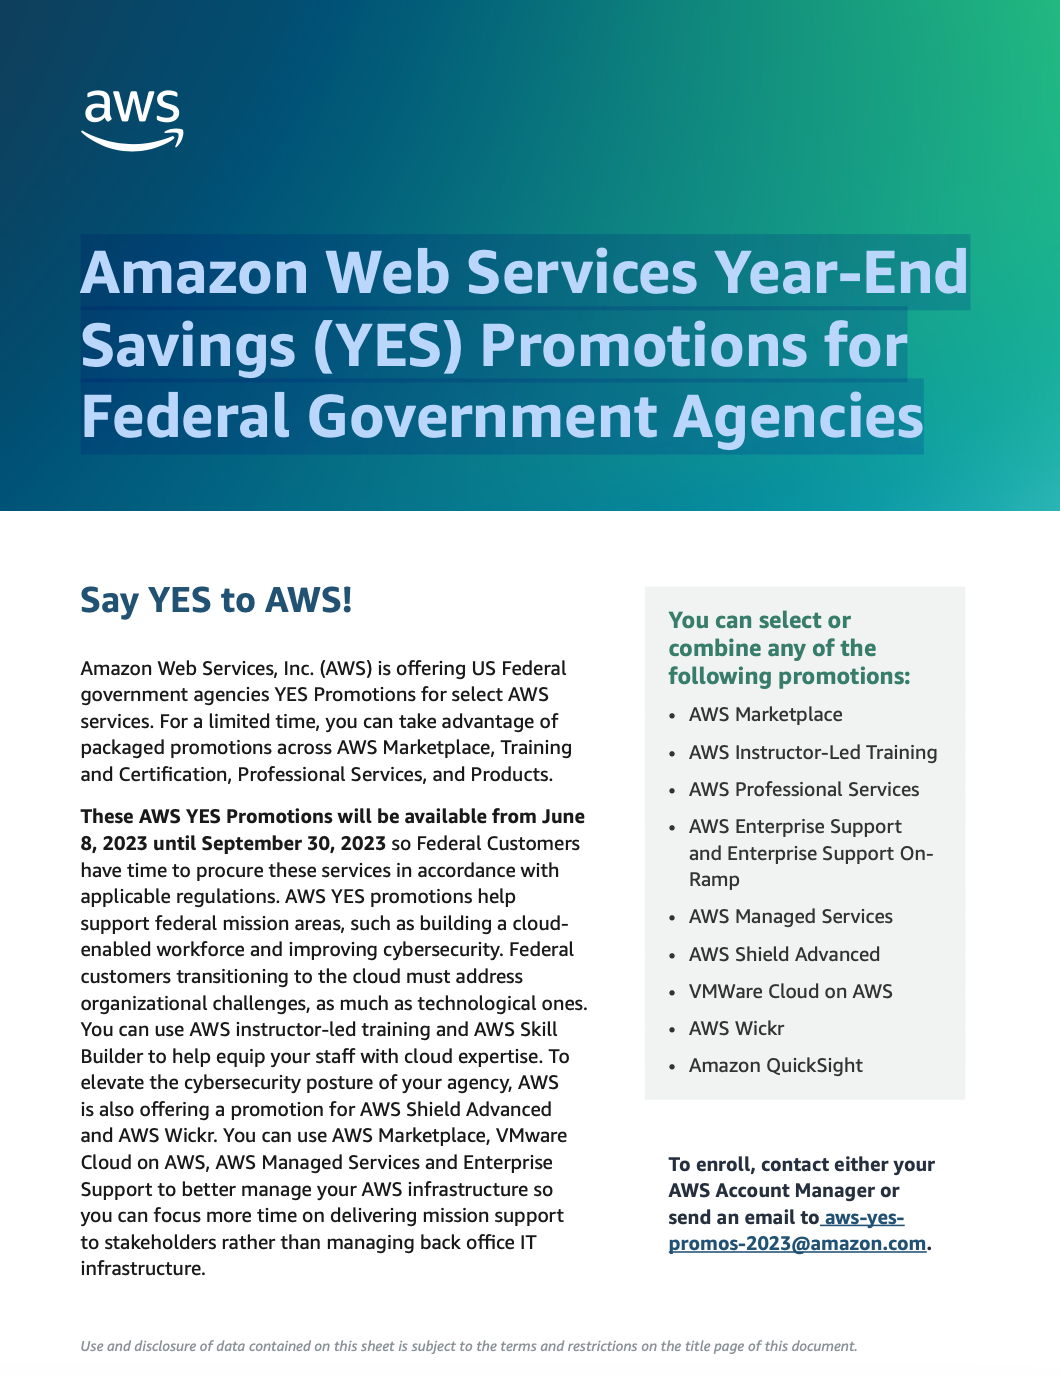 Amazon Web Services Year-End Savings (YES) Promotions for Federal Government Agencies